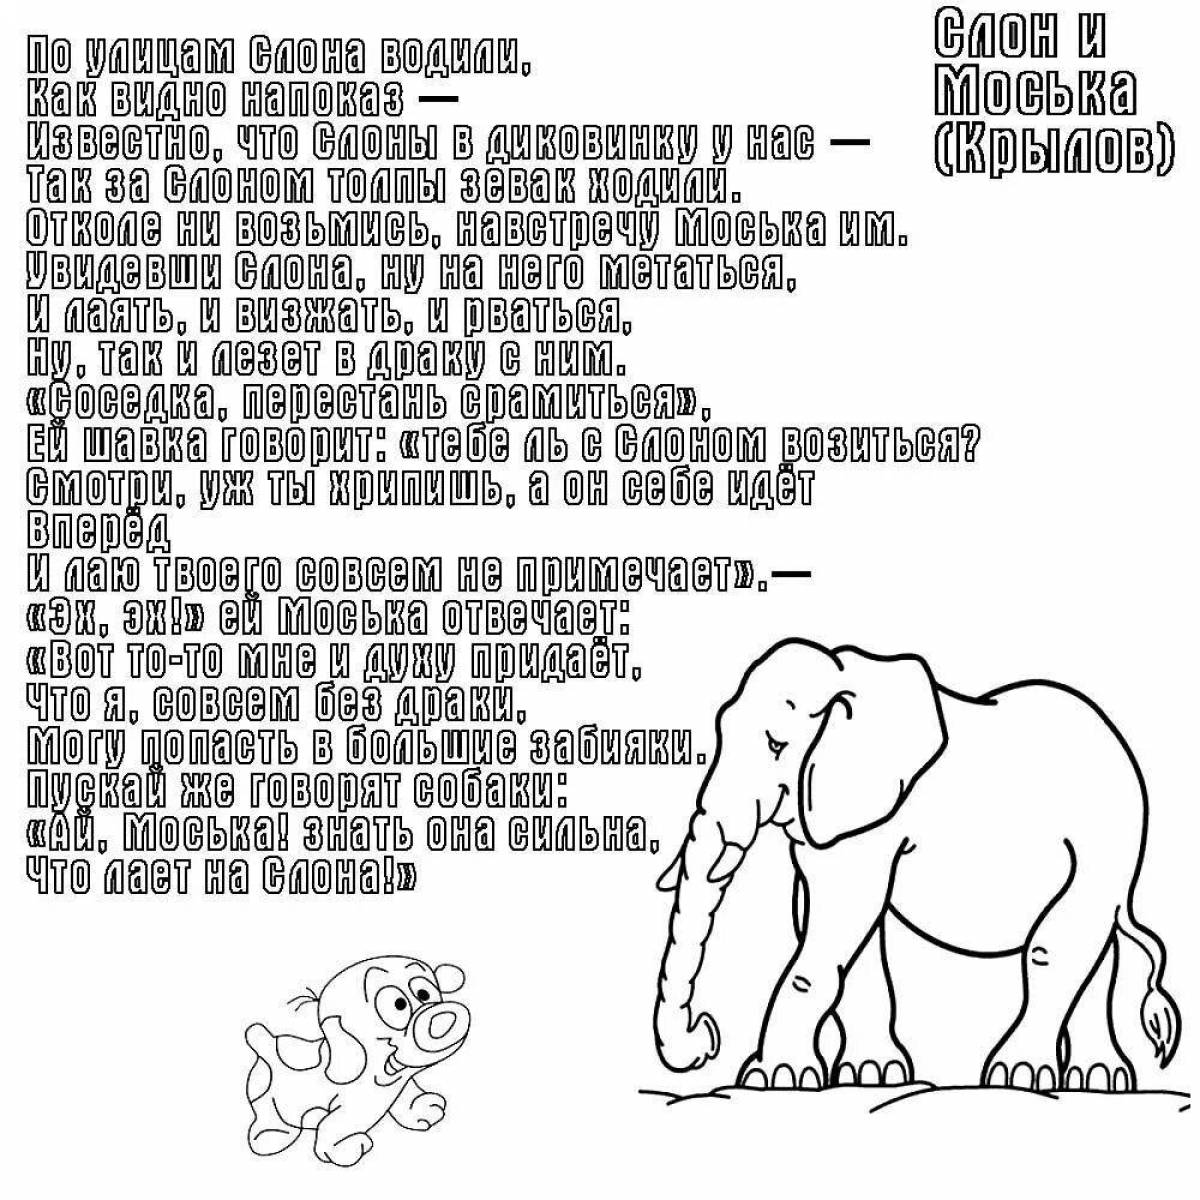 Coloring book shiny elephant and pug